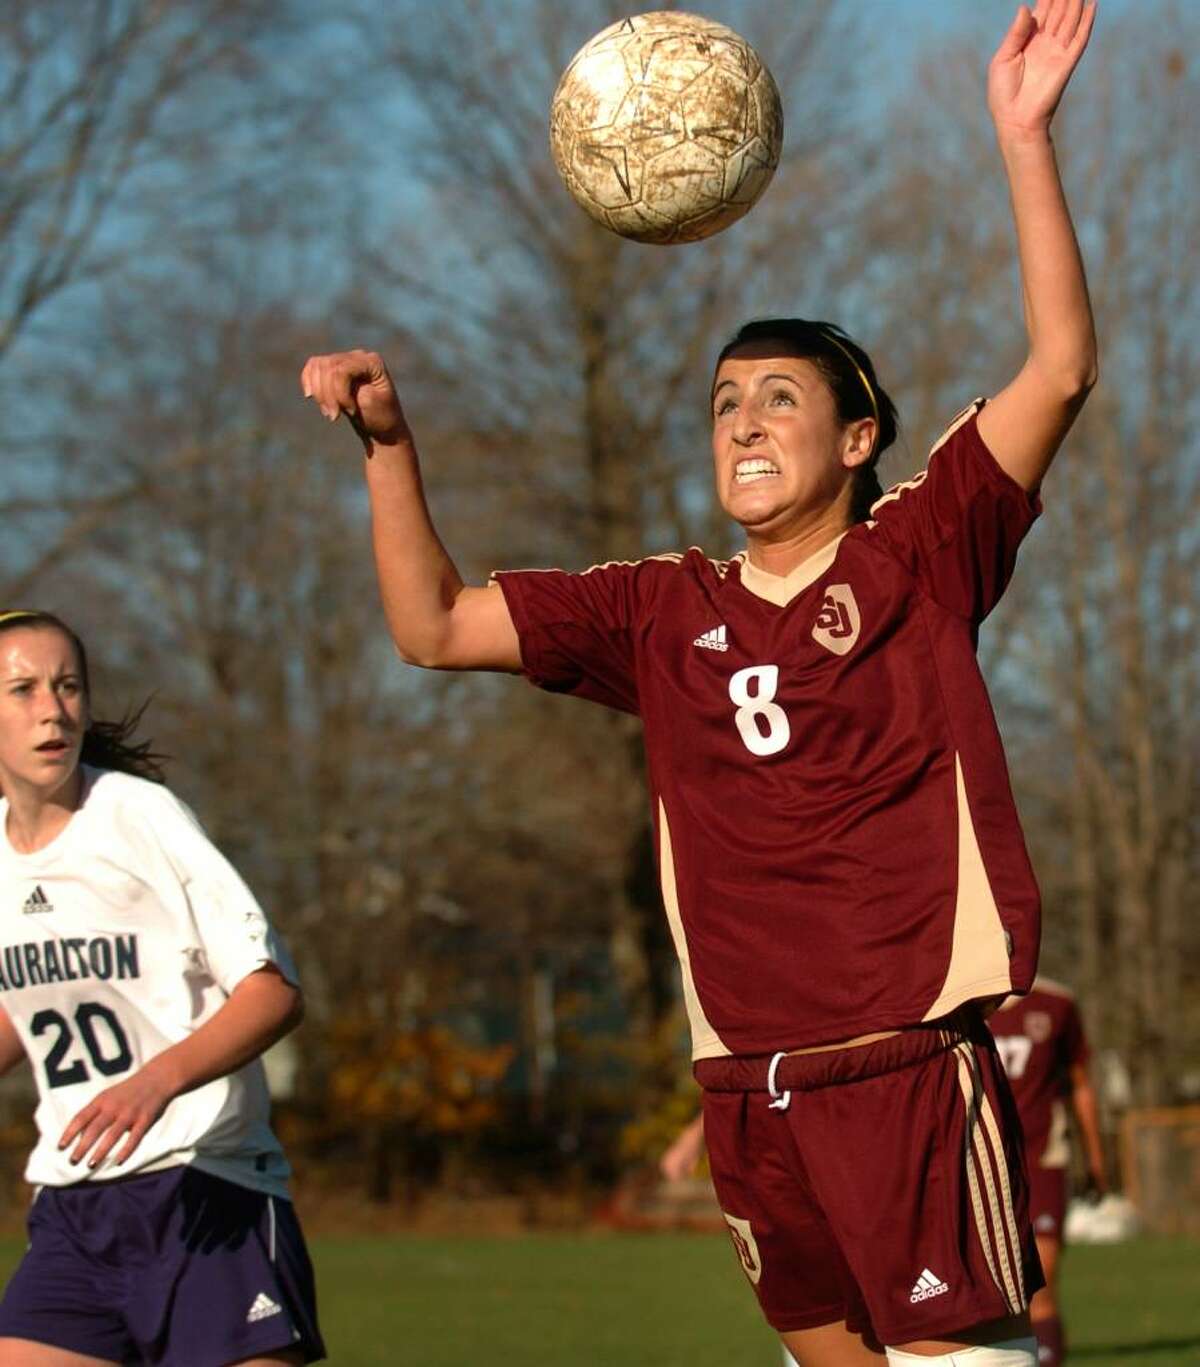 St. Joseph's Jessica Schloth heads the ball as Lauralton Hall's Nicole Peterson looks on during Monday's Class M state tournament game at Lauralton Hall in Milford. St. Joseph won the game 2-0.